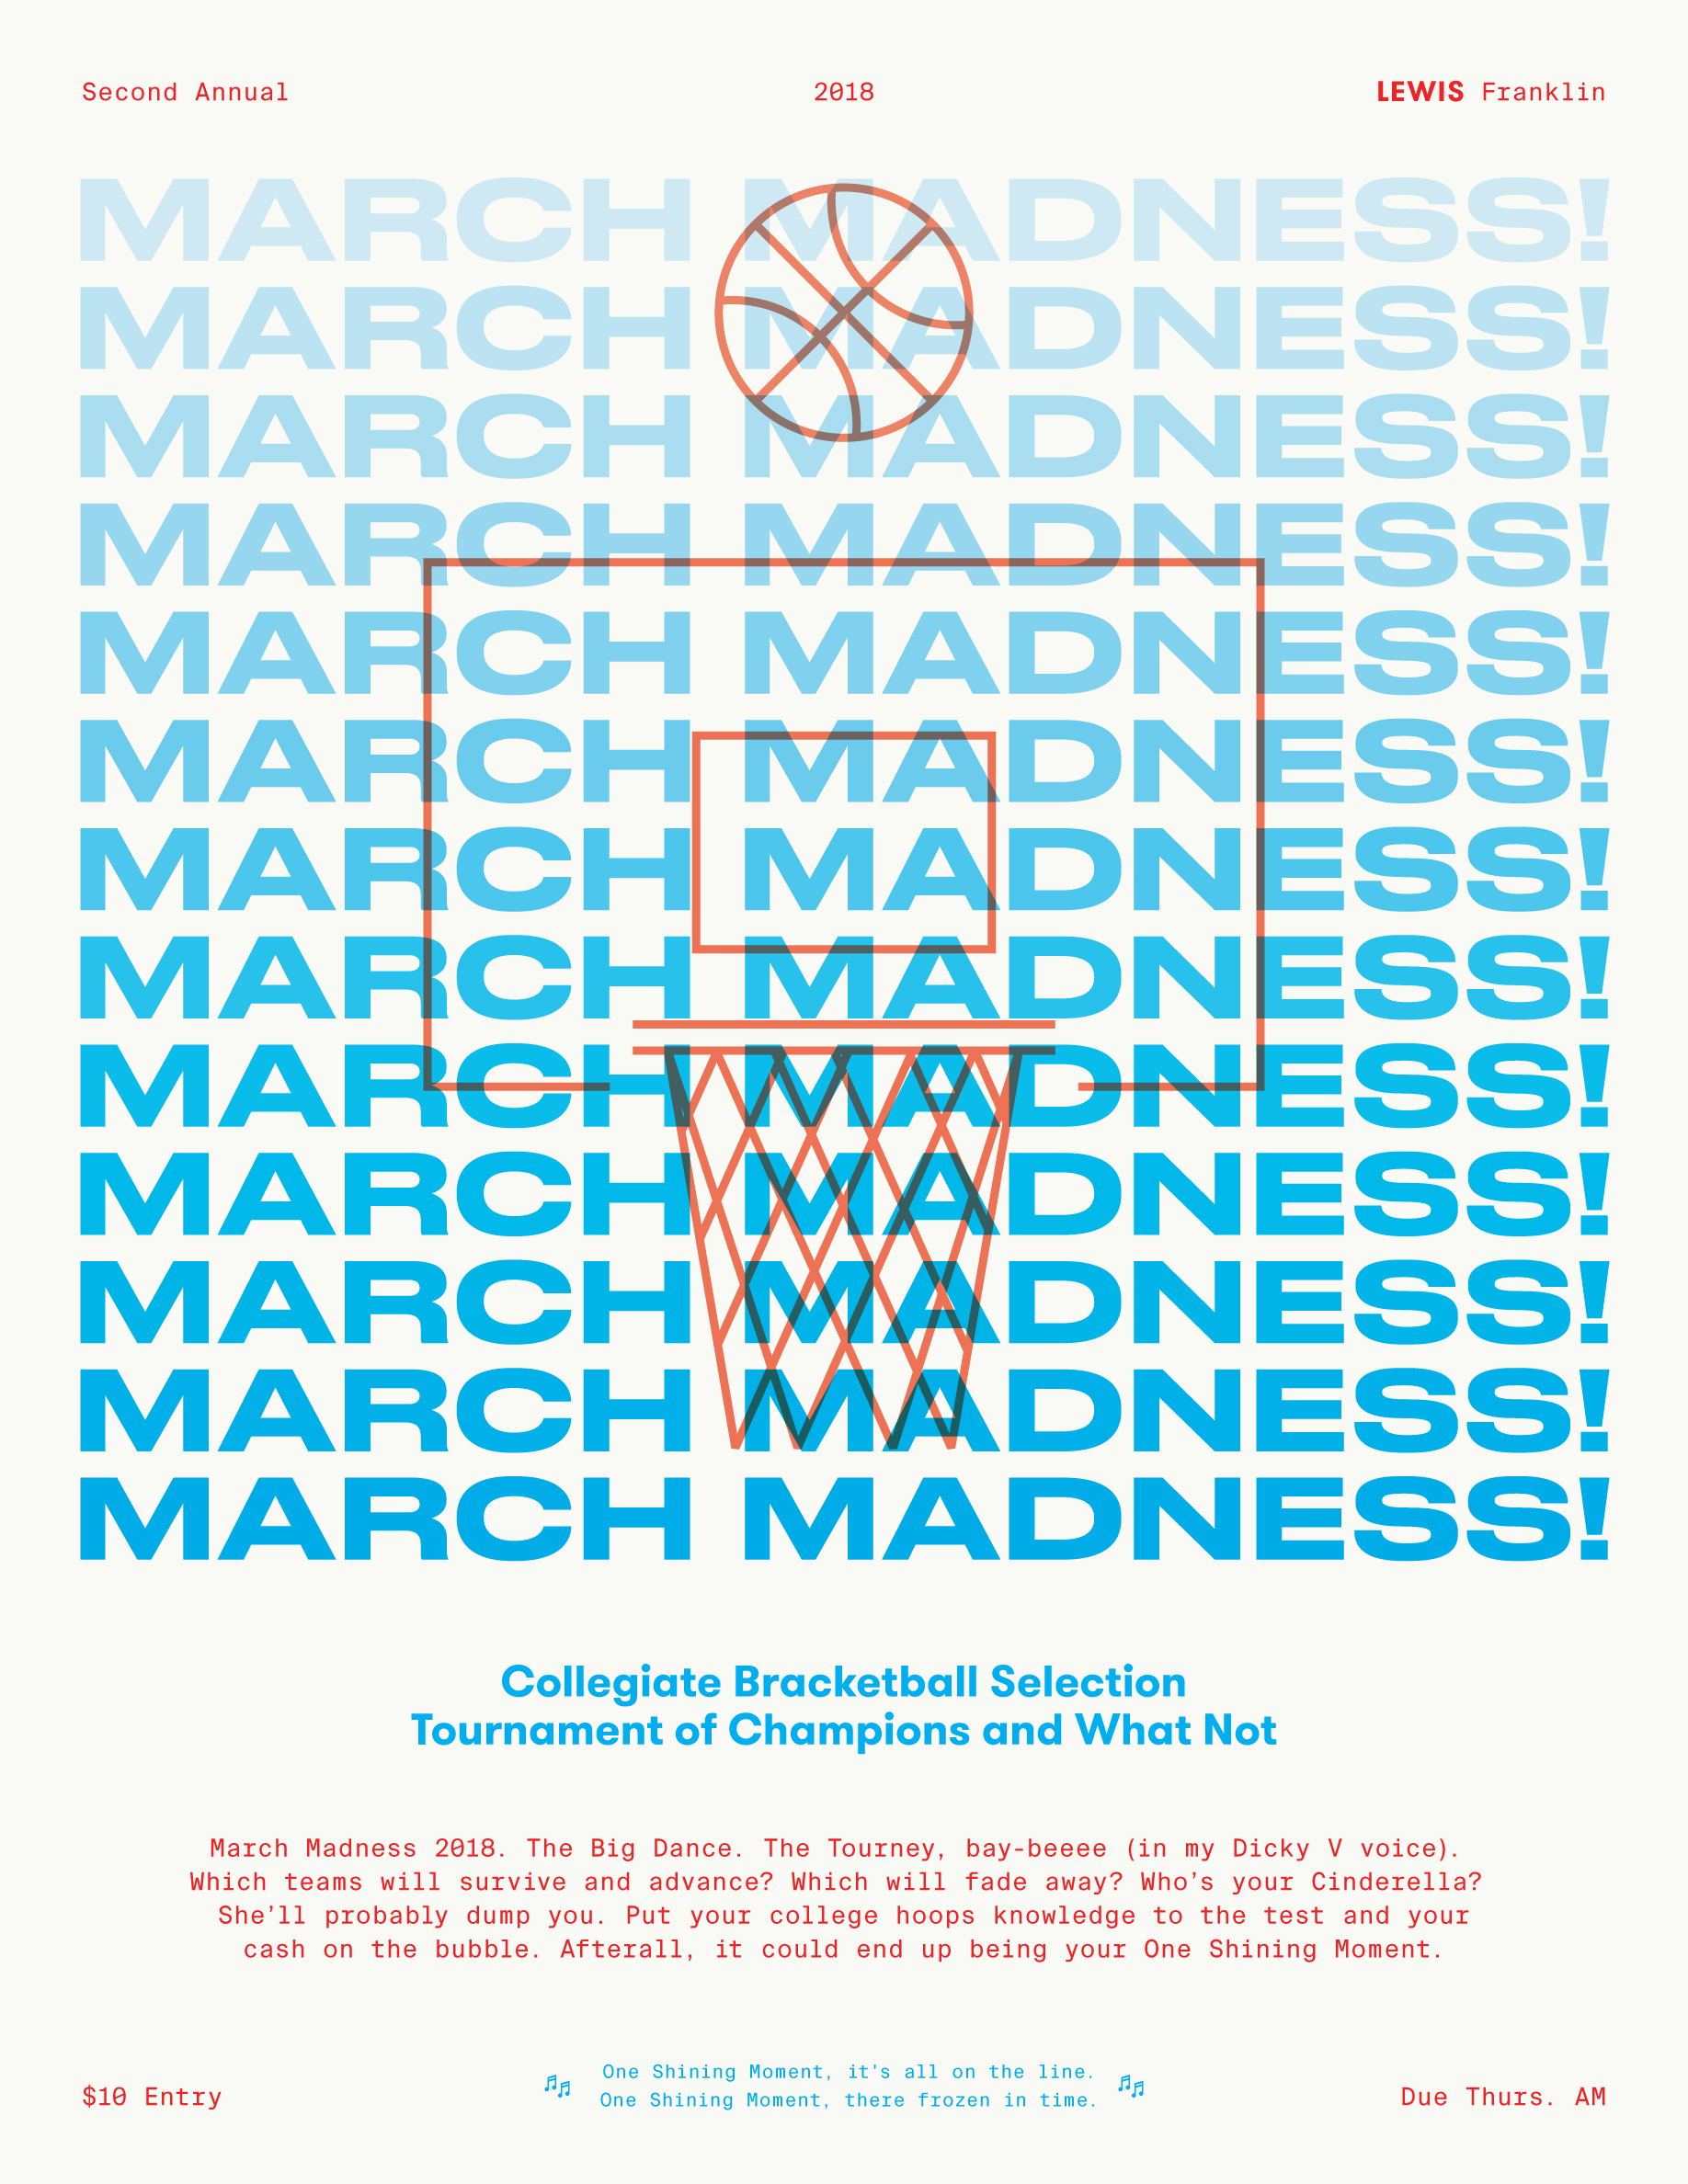 March Madness 2018 by Bud Thomas on Dribbble